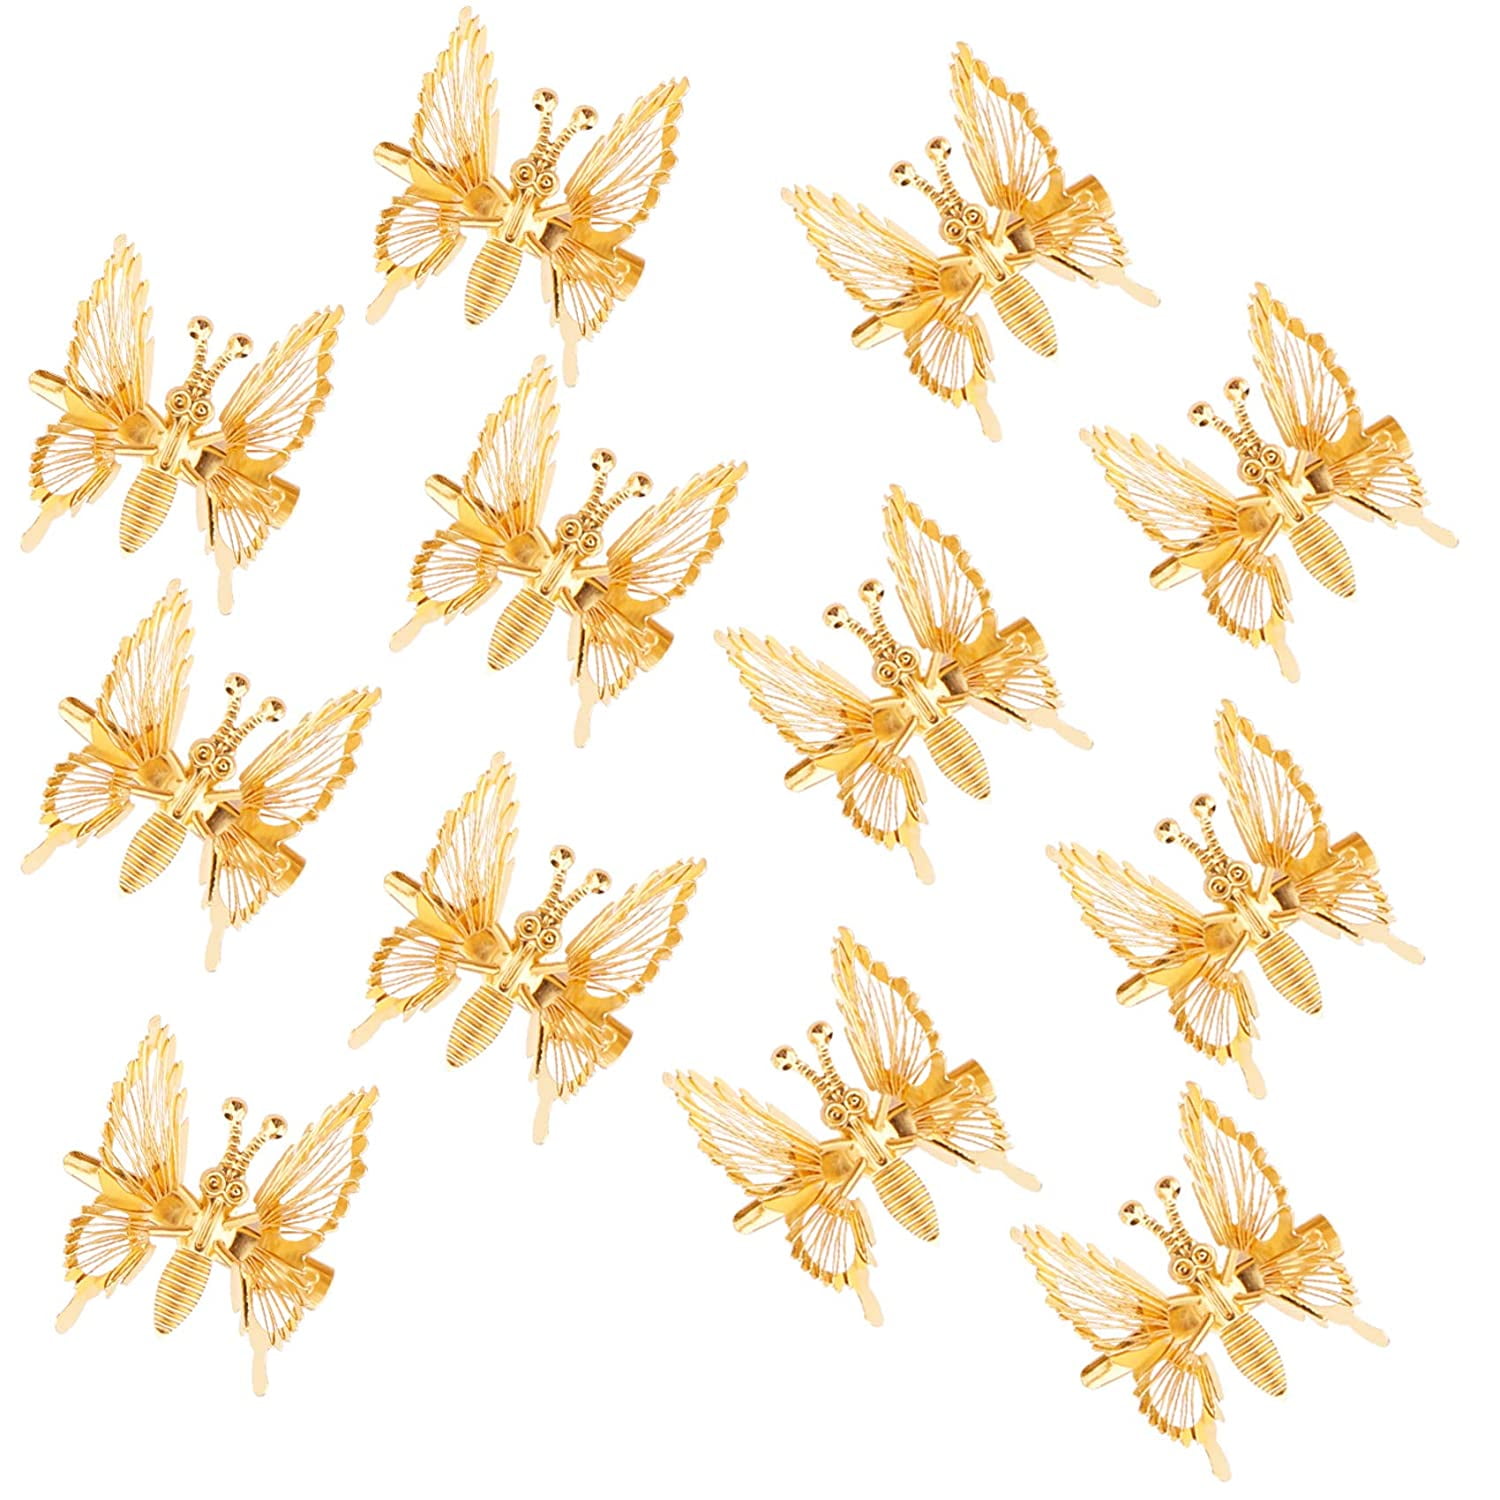 Mini Flower Shiny Glittery Cute Plastic Hair Snap Claw Styling Lot of 576 Clips 